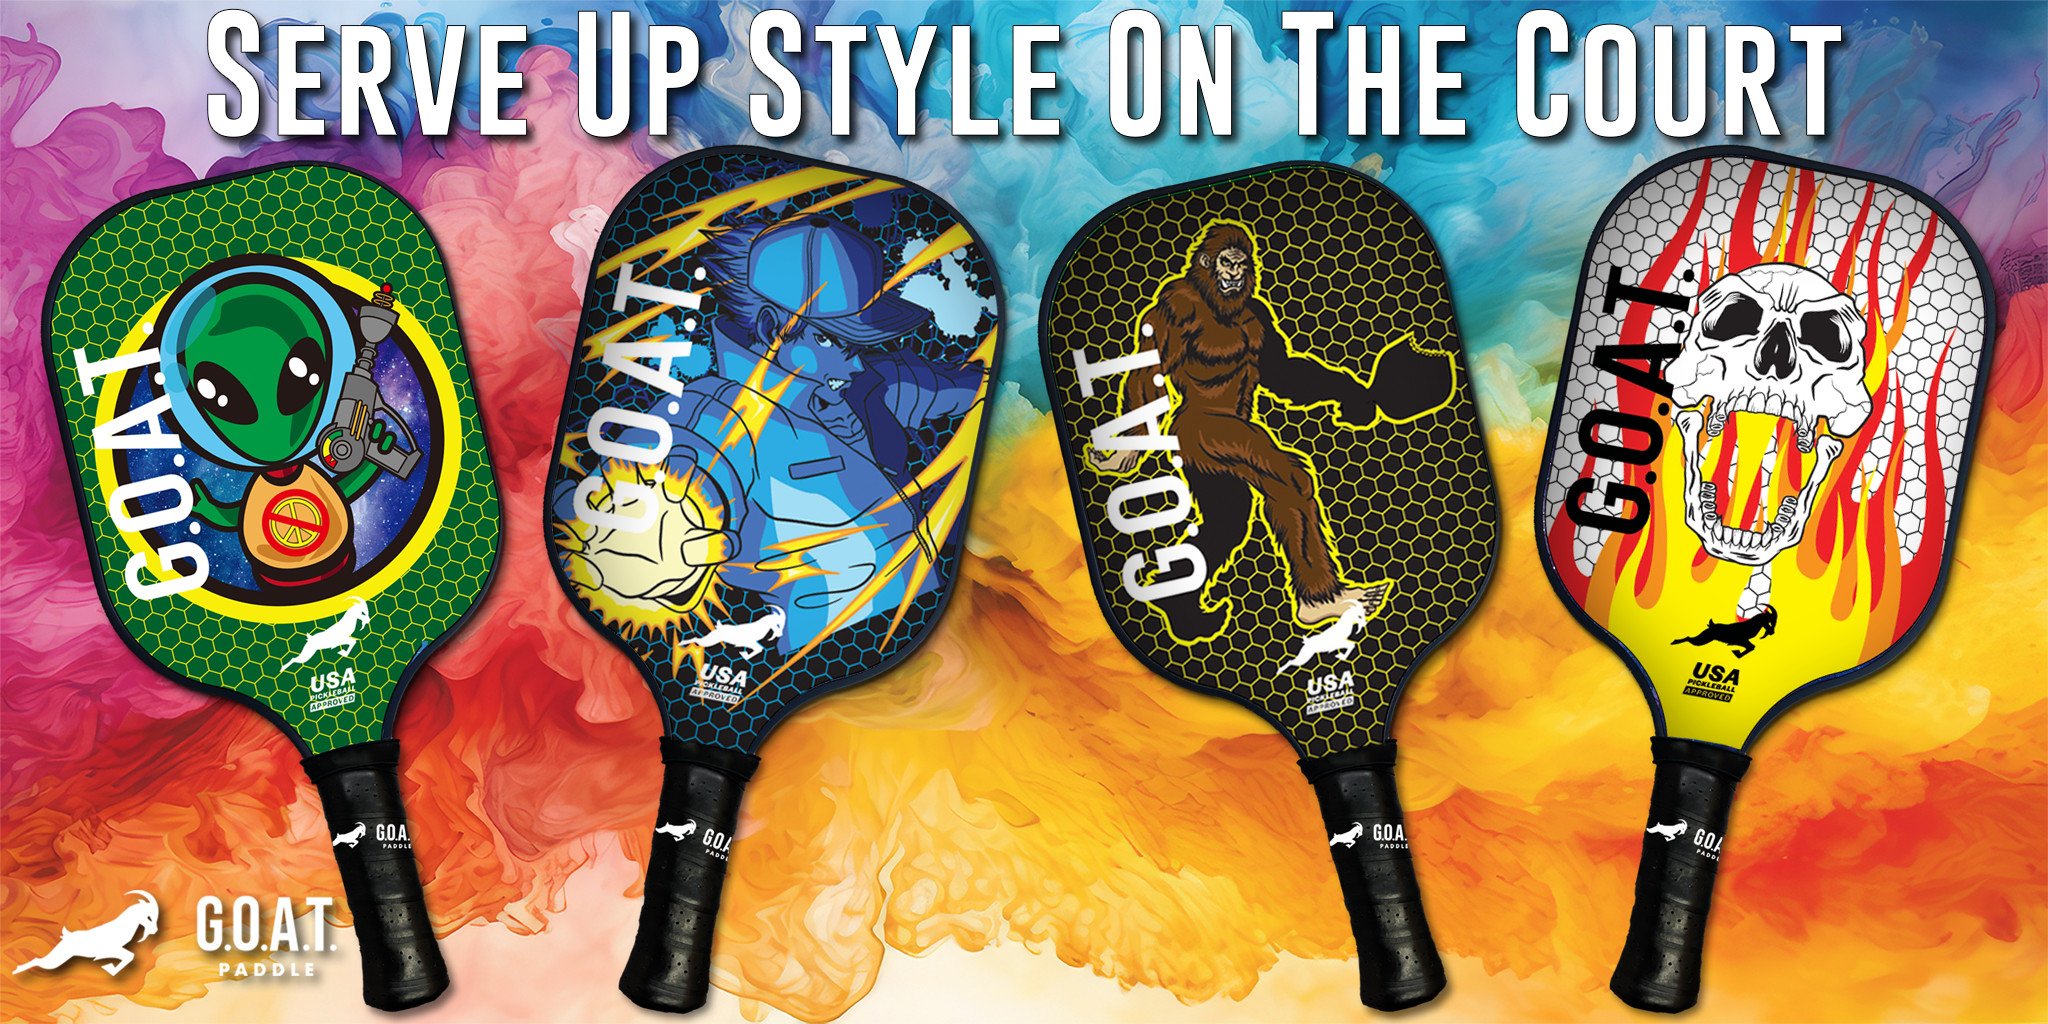 GOAT Entertainment Pickleball Paddles - Alien, Anime, Big Foot (Sasquatch), Skull with Fire all with GOAT logo and name etched on them.  Bright, Colorful and Fun paddles.  Text "Serve up style on the court"